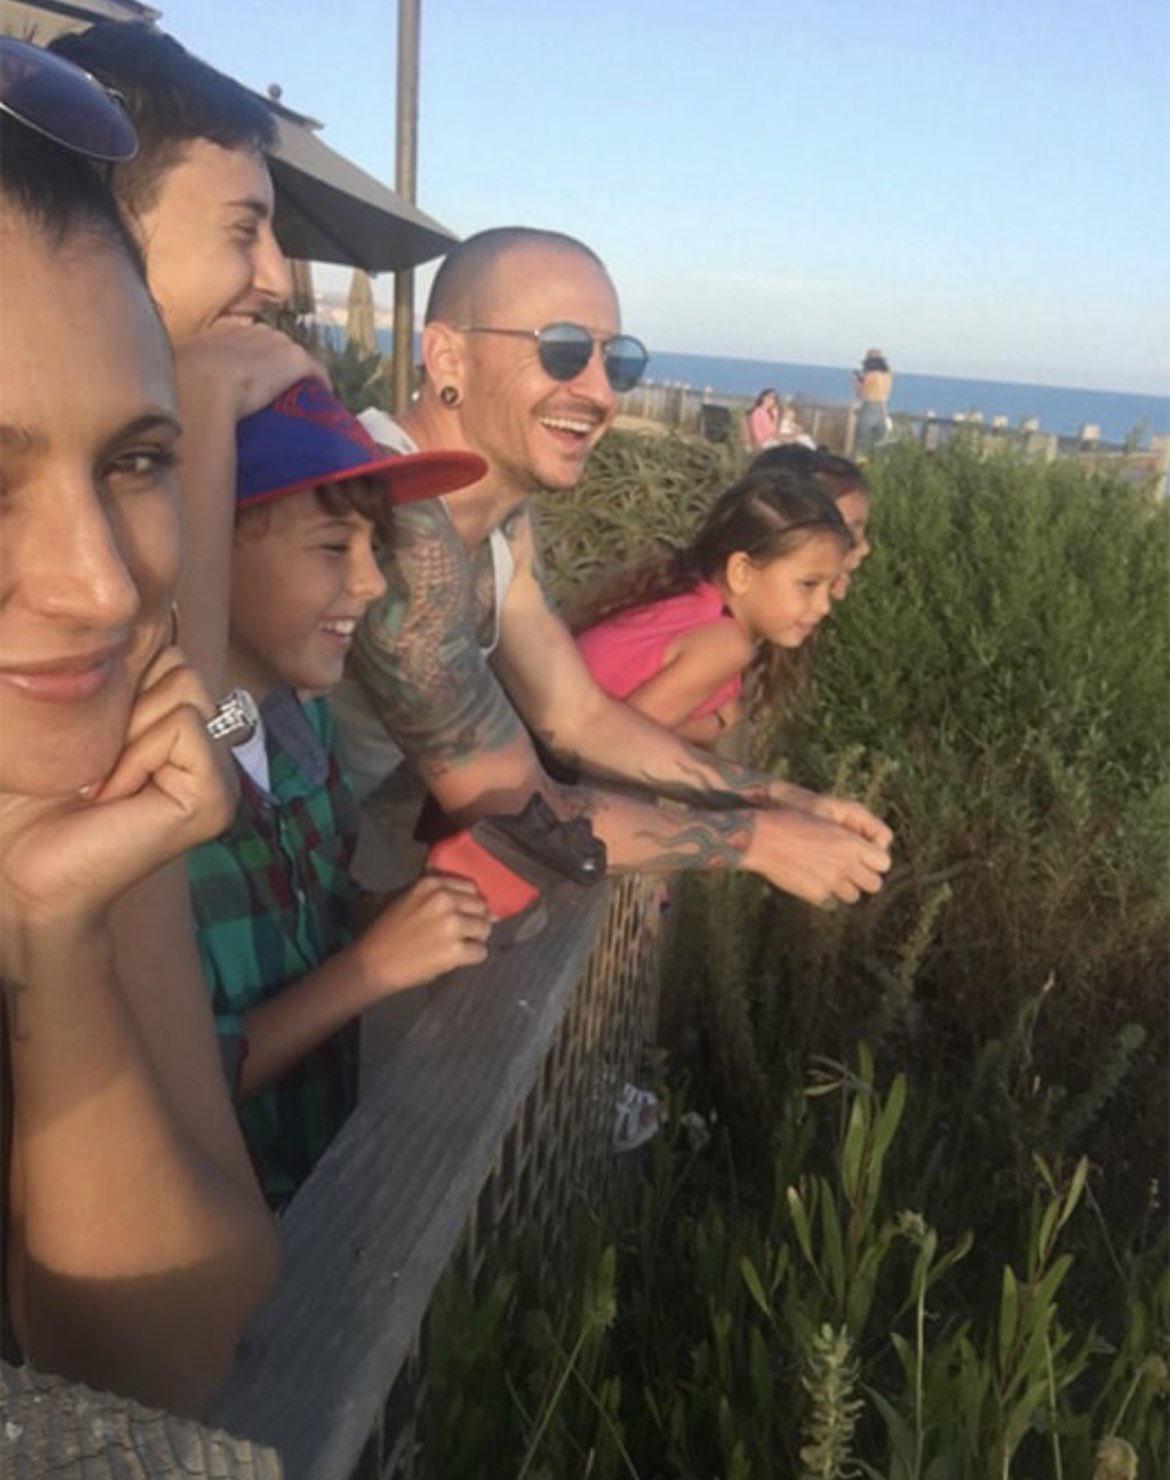 The very last photo of Chester Bennington (Linkin Park's lead singer) taken by his wife just one day before he took his own life.